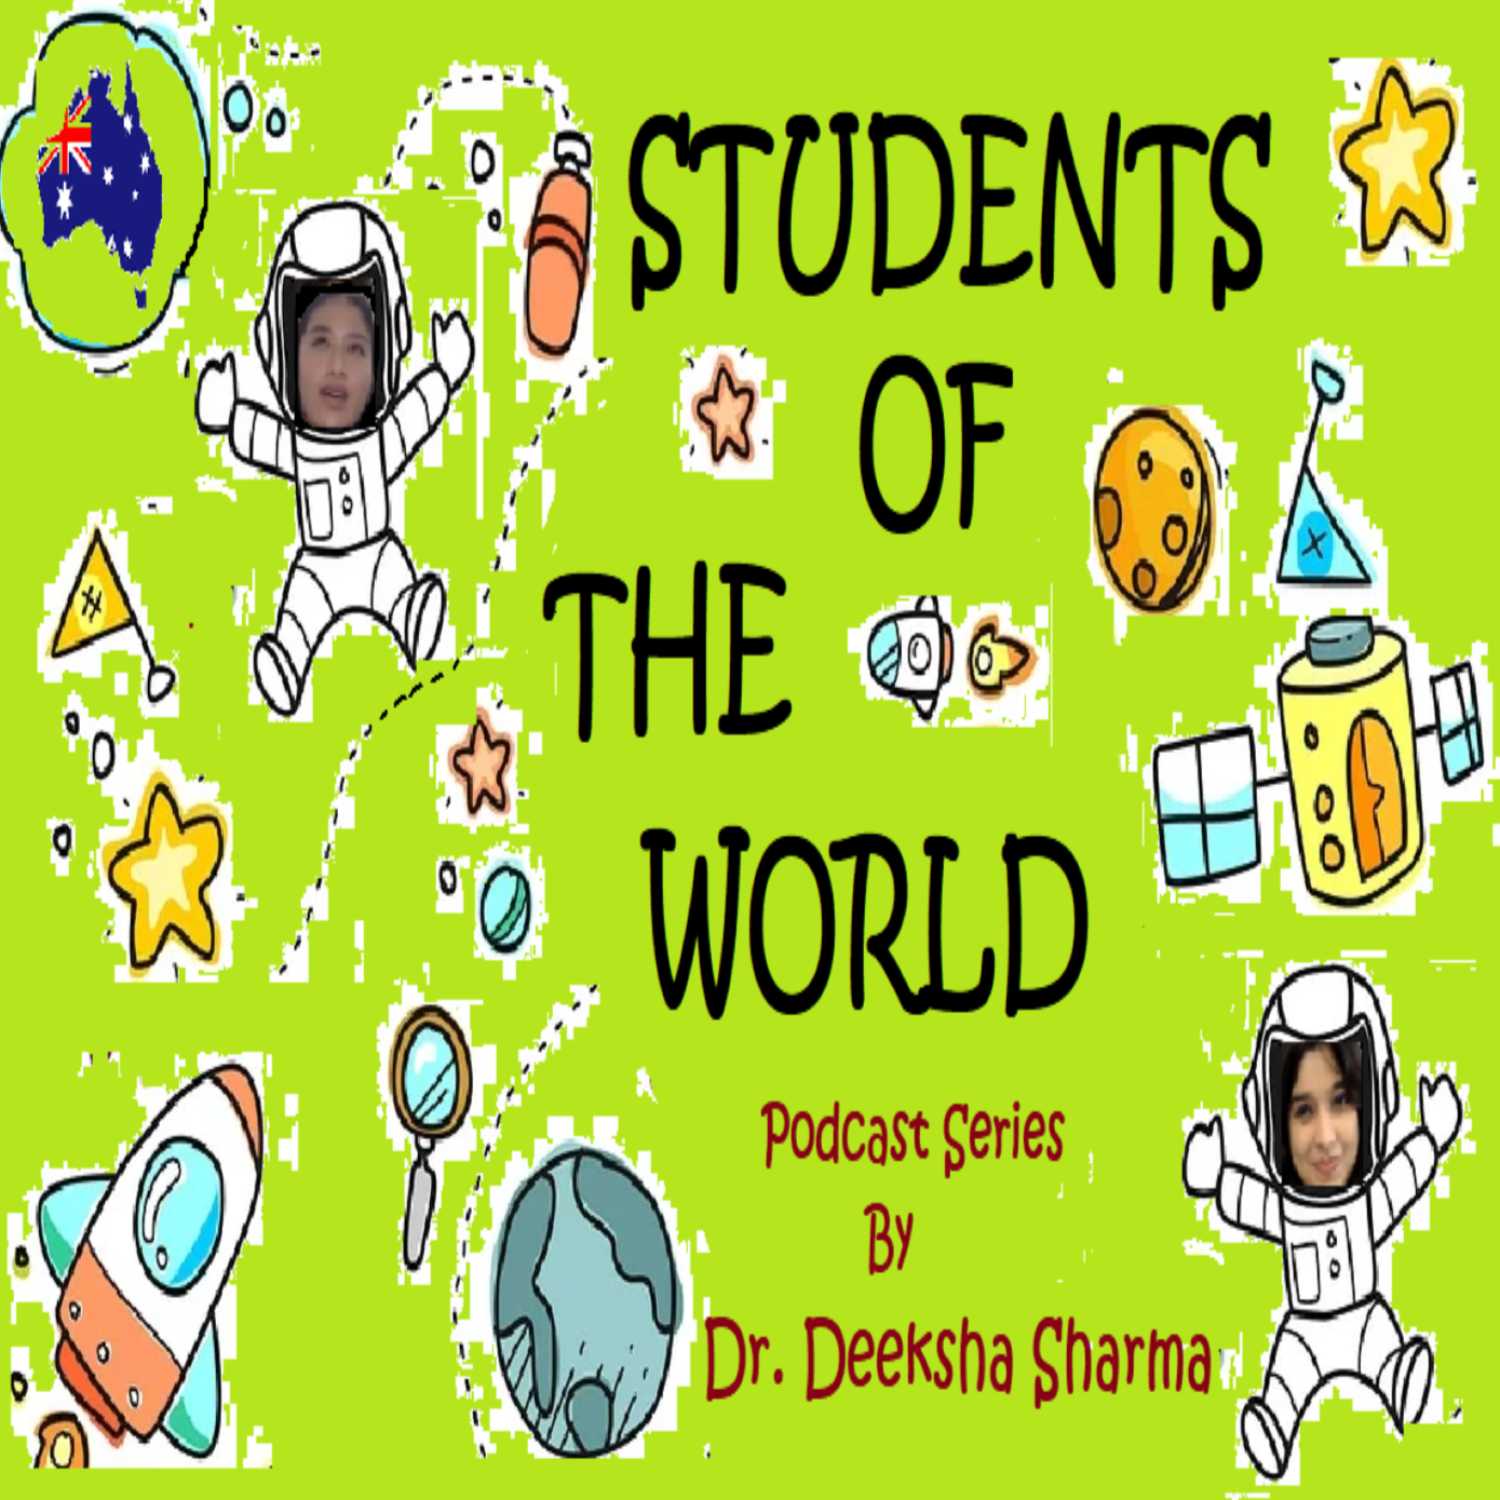 STUDENTS OF THE WORLD Podcast series by Dr. Deeksha Sharma